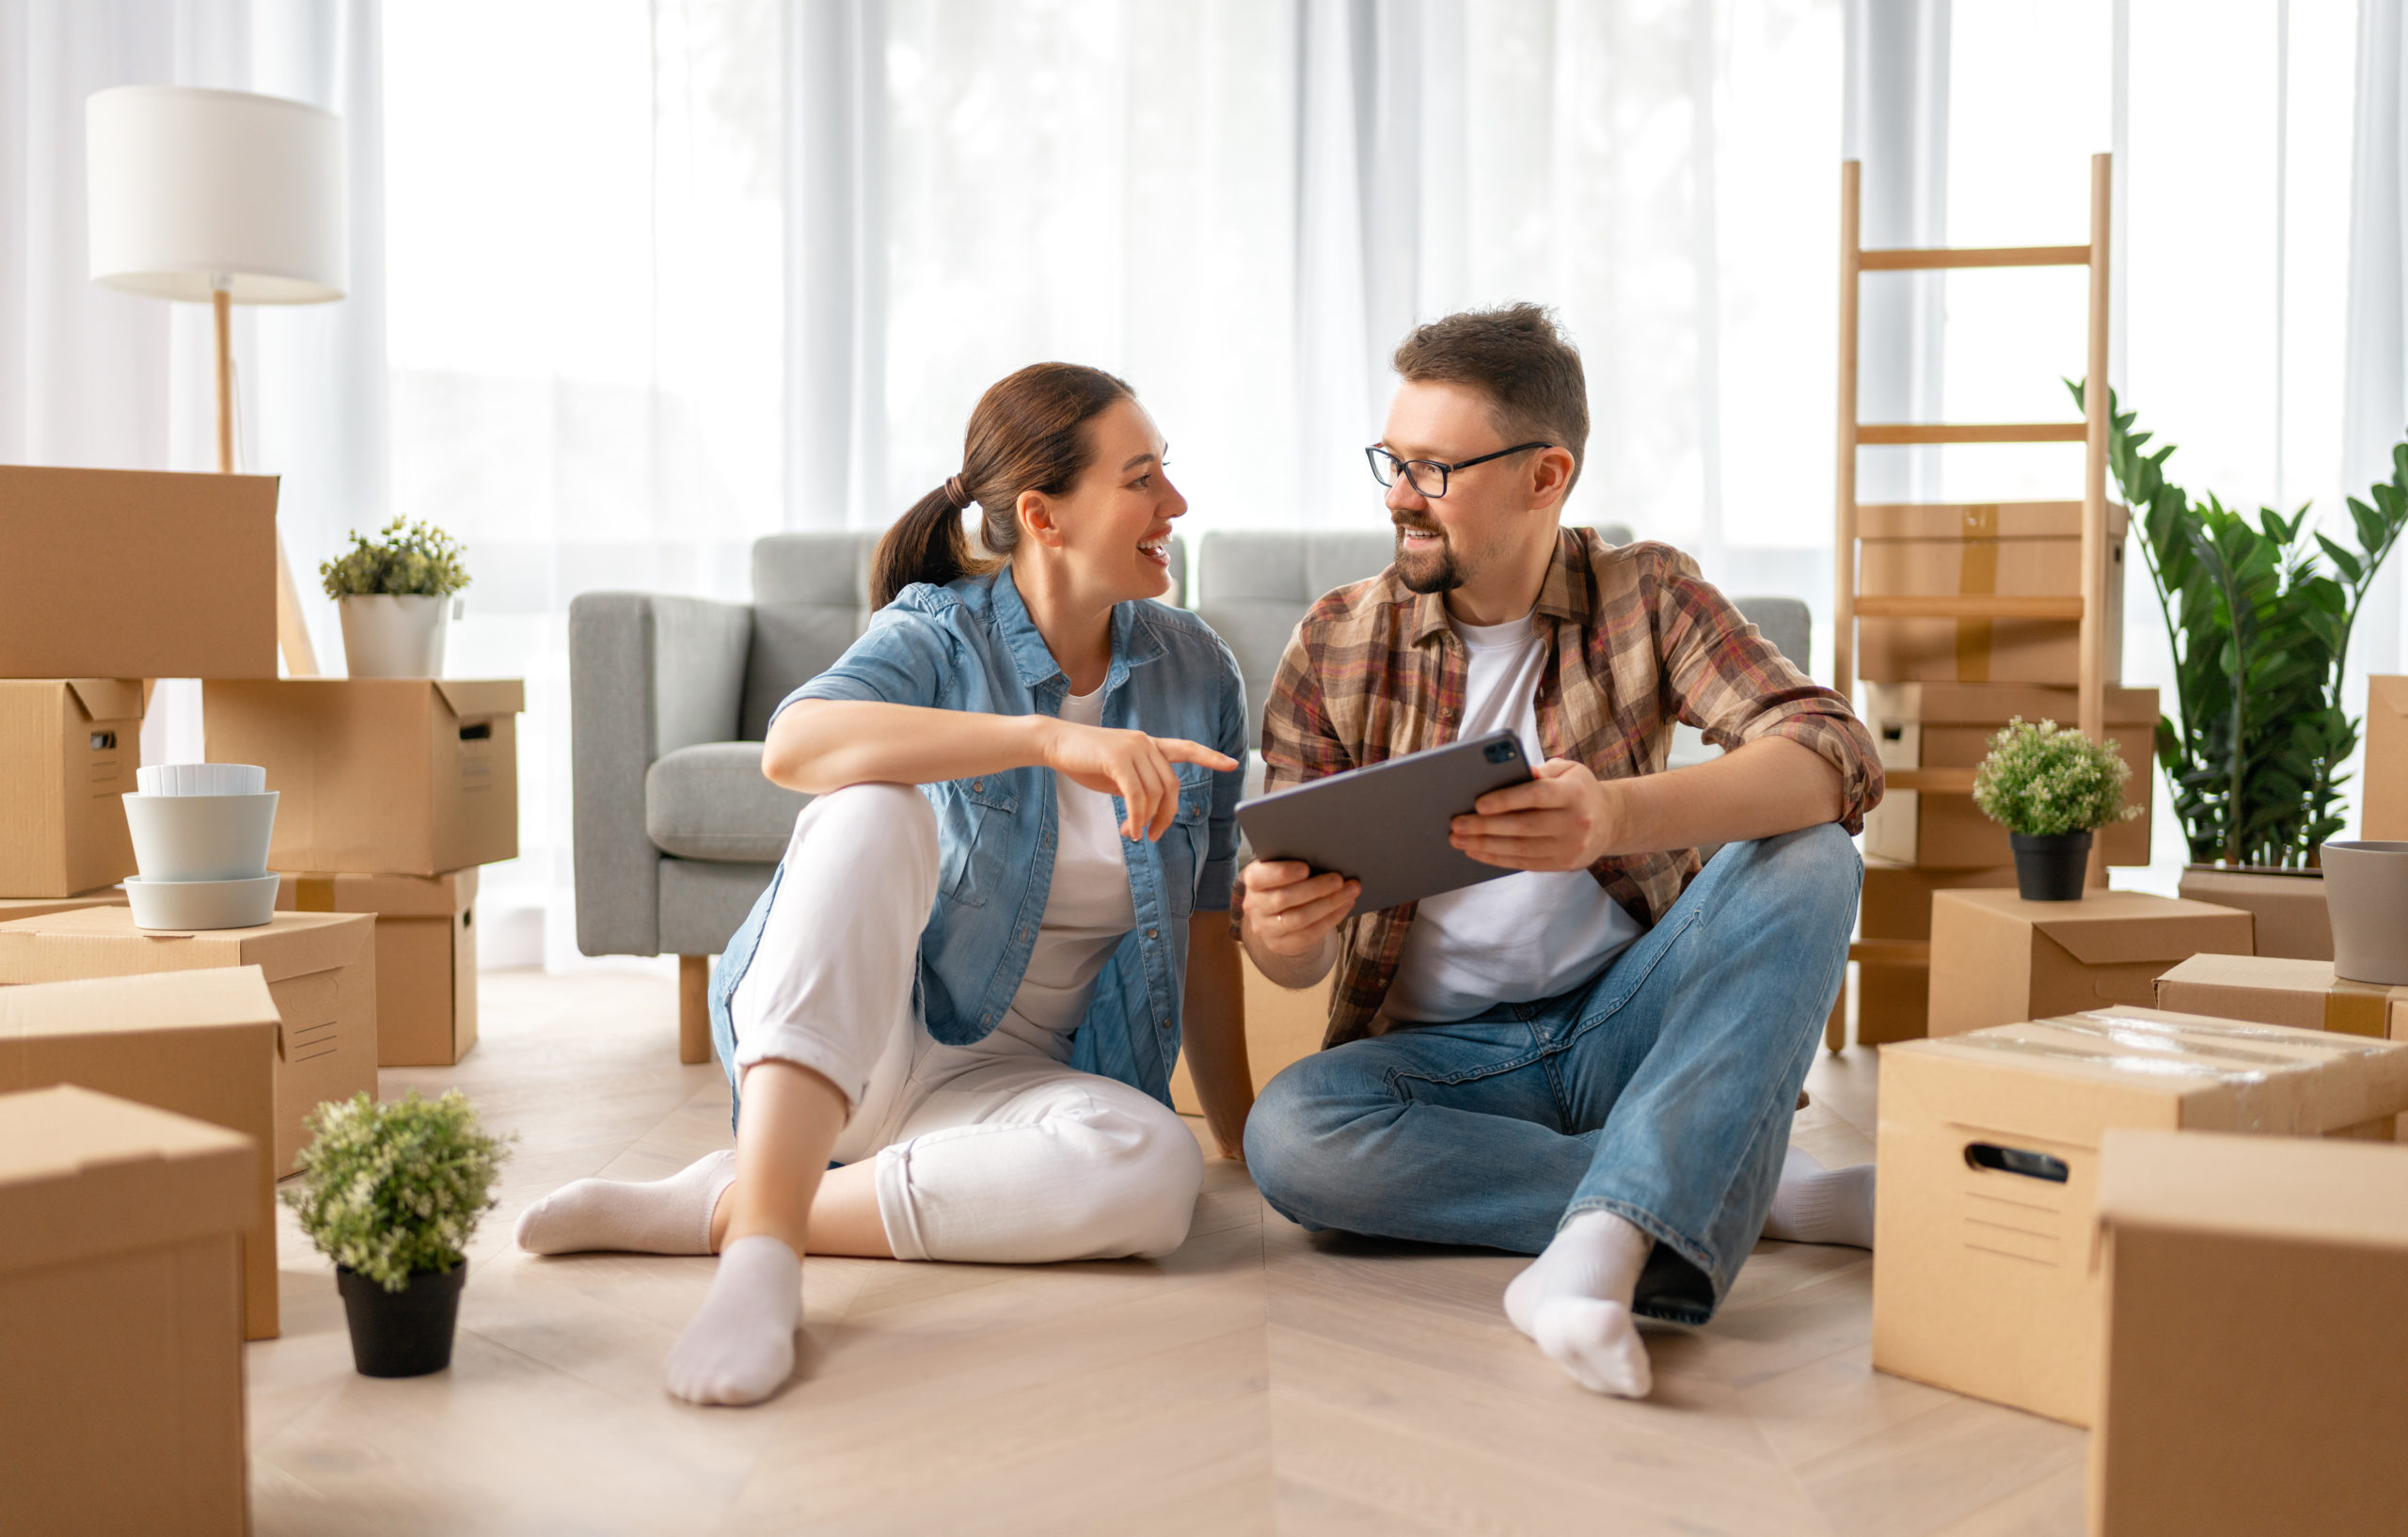 A Guide To Asking Your Partner To Move In With You